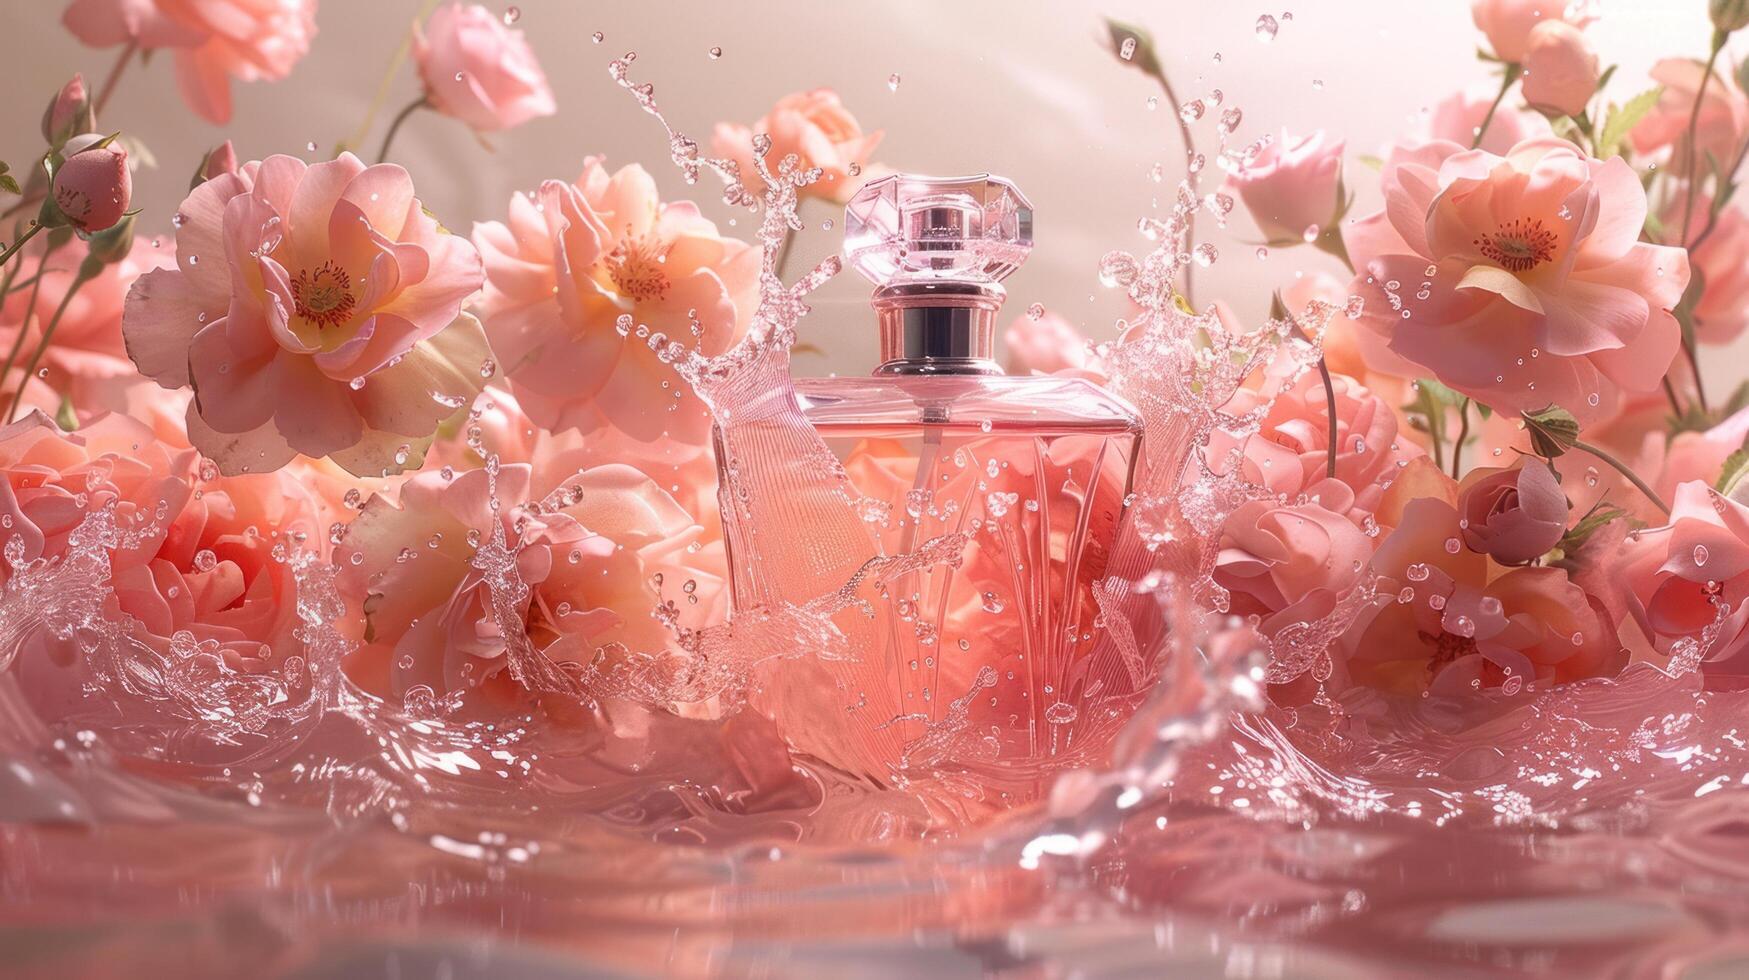 AI generated Perfume bottle made of glass set against a backdrop of rose water. Featuring a floral arrangement with a water splash photo